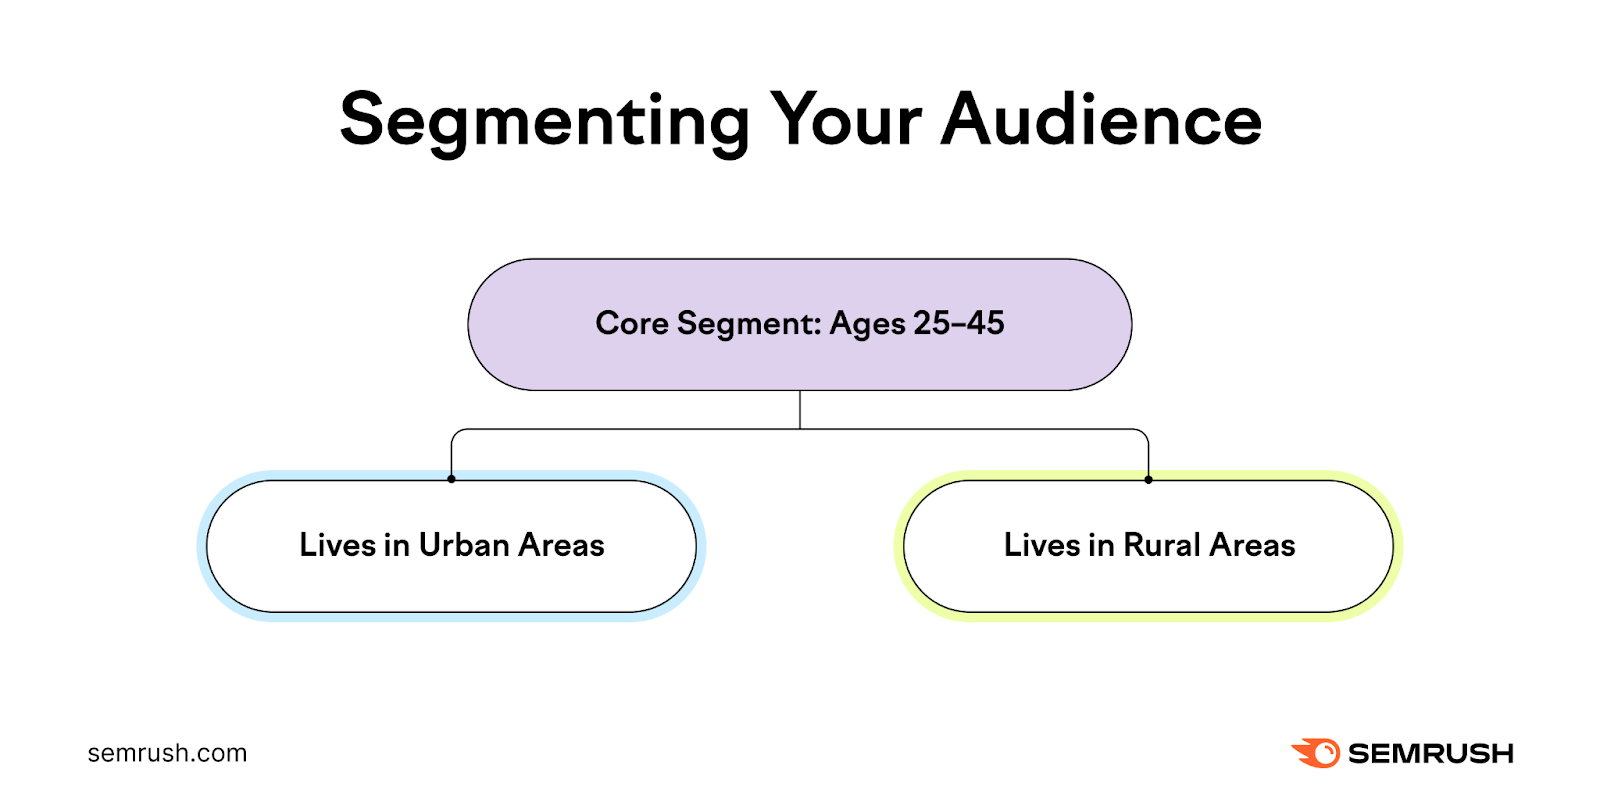 segmenting audience: core segment: ages 25-45 segmented into the ones that live in urban areas vs rural areas